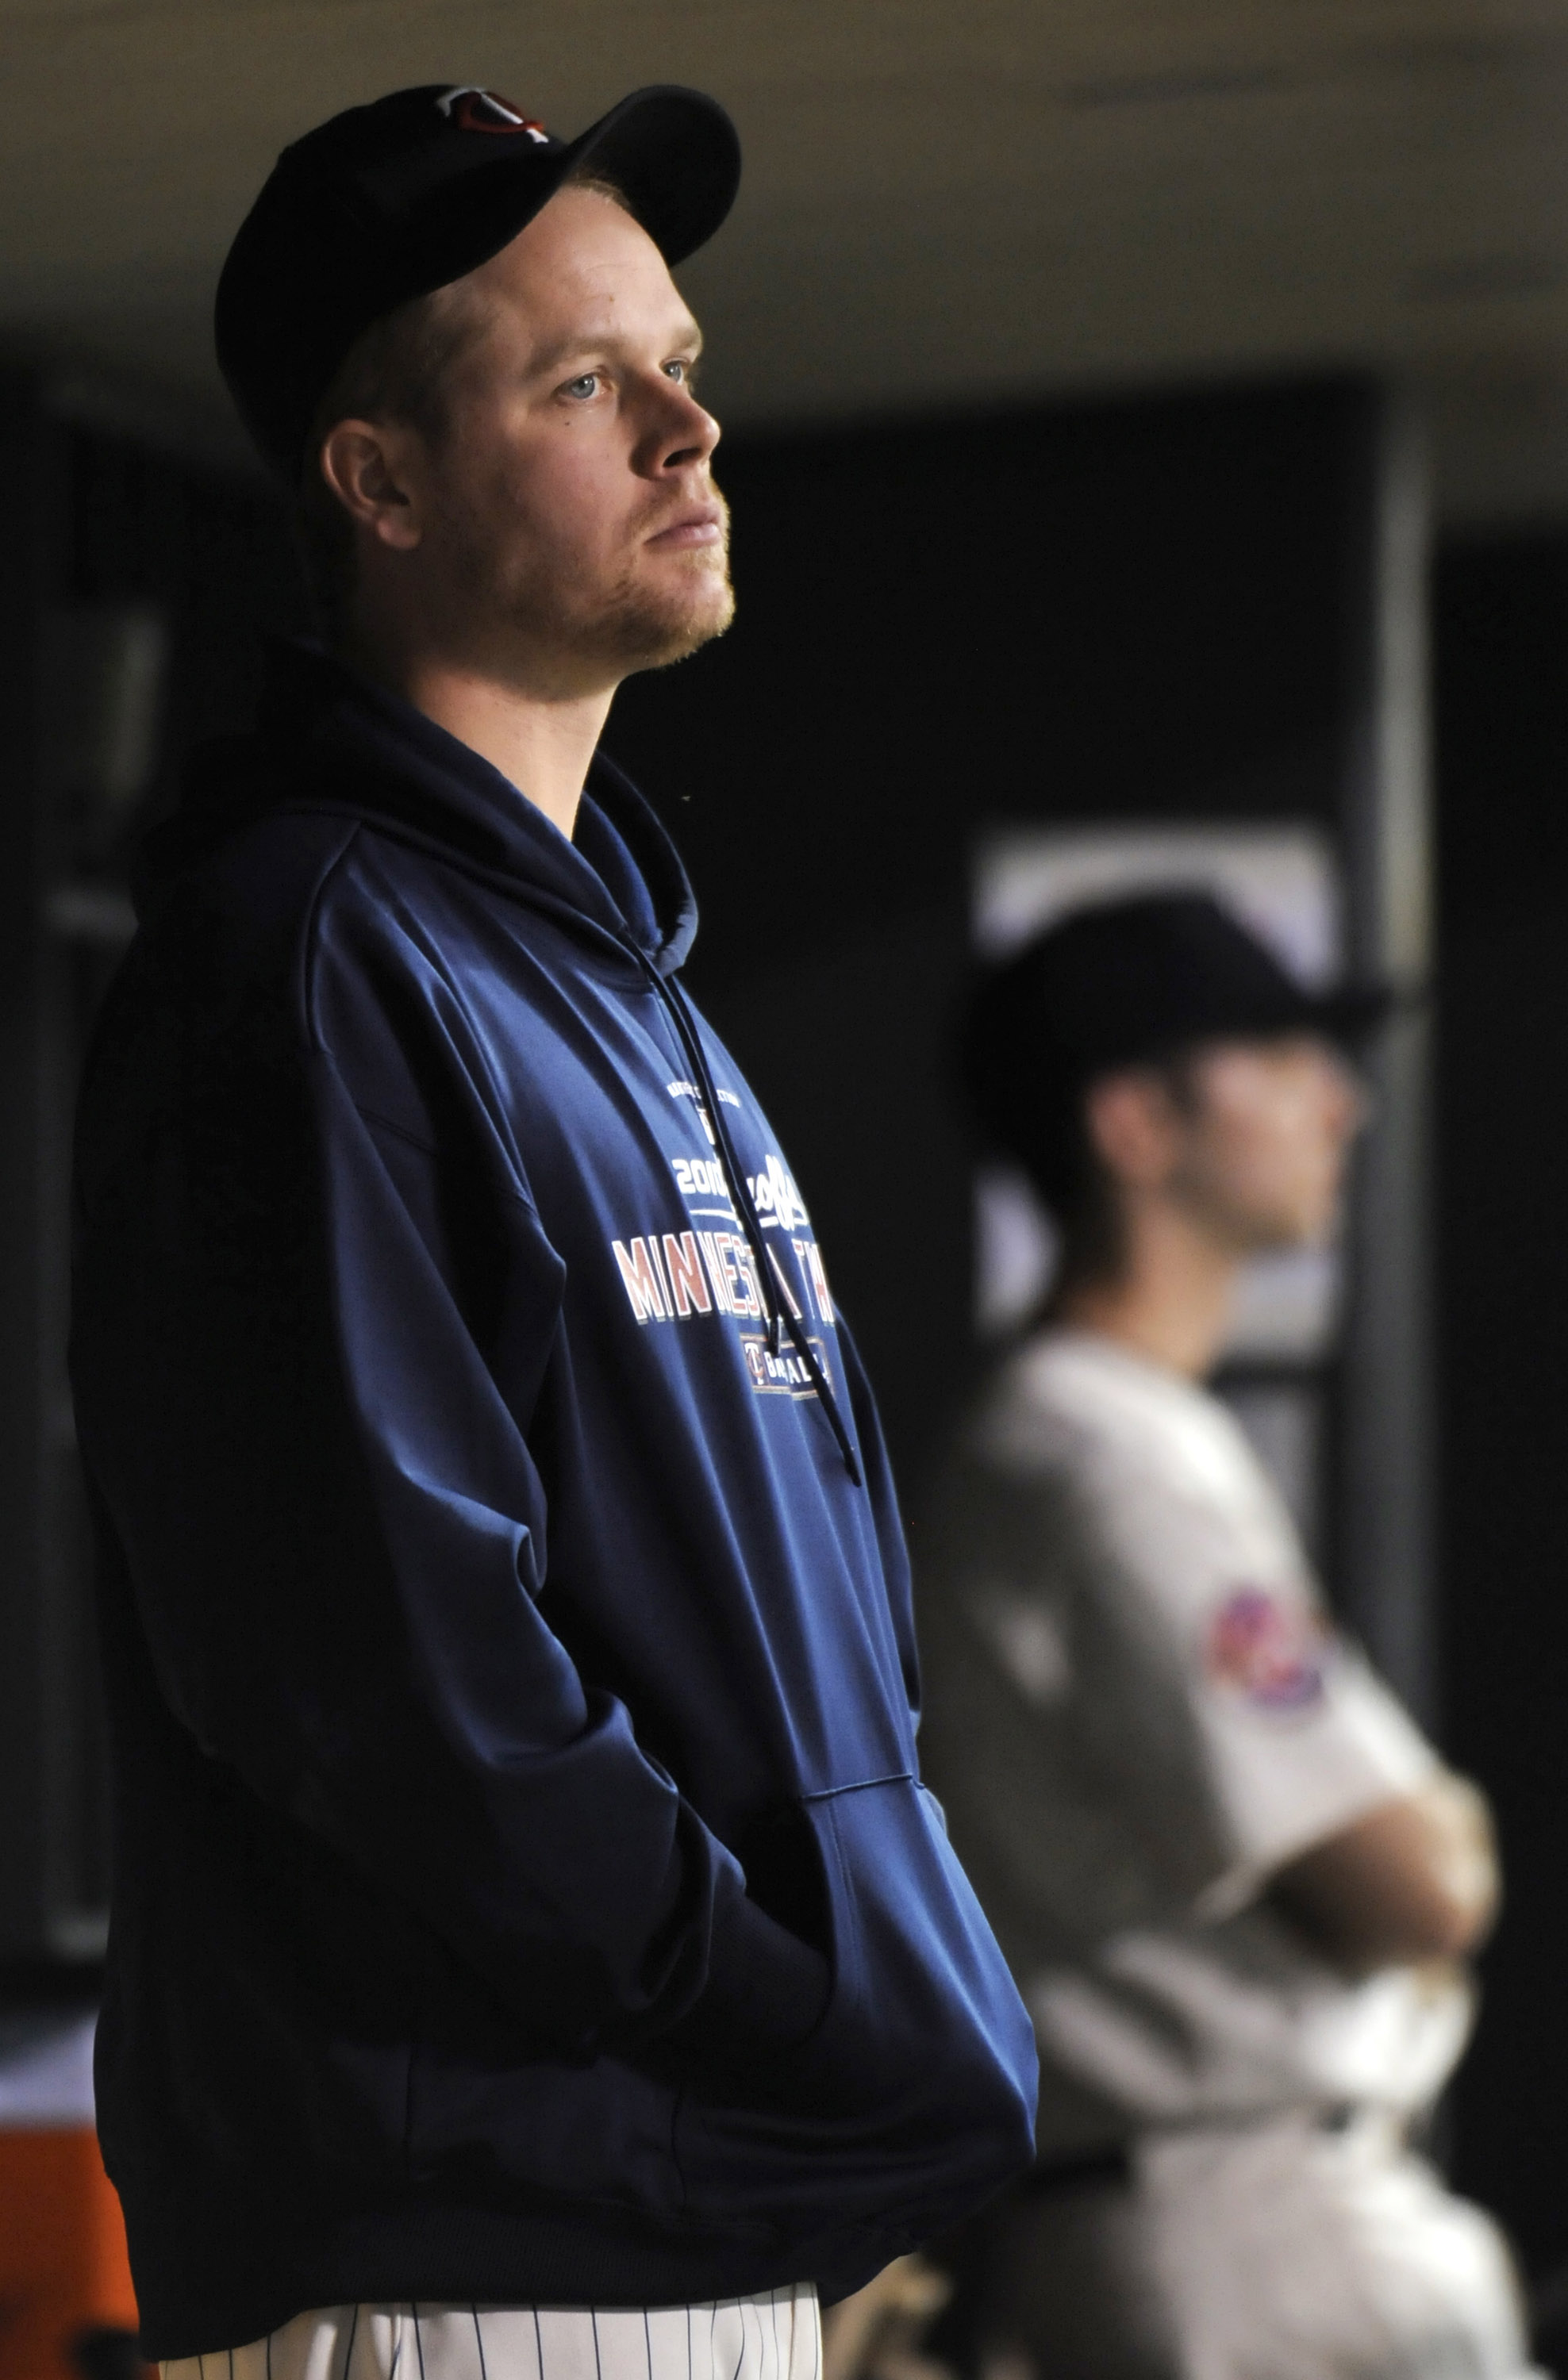 MINNEAPOLIS, MN - OCTOBER 7: Justin Morneau #33 of the Minnesota Twins in the dugout during game two of the ALDS game against the New York Yankees on October 7, 2010 at Target Field in Minneapolis, Minnesota. (Photo by Hannah Foslien /Getty Images)